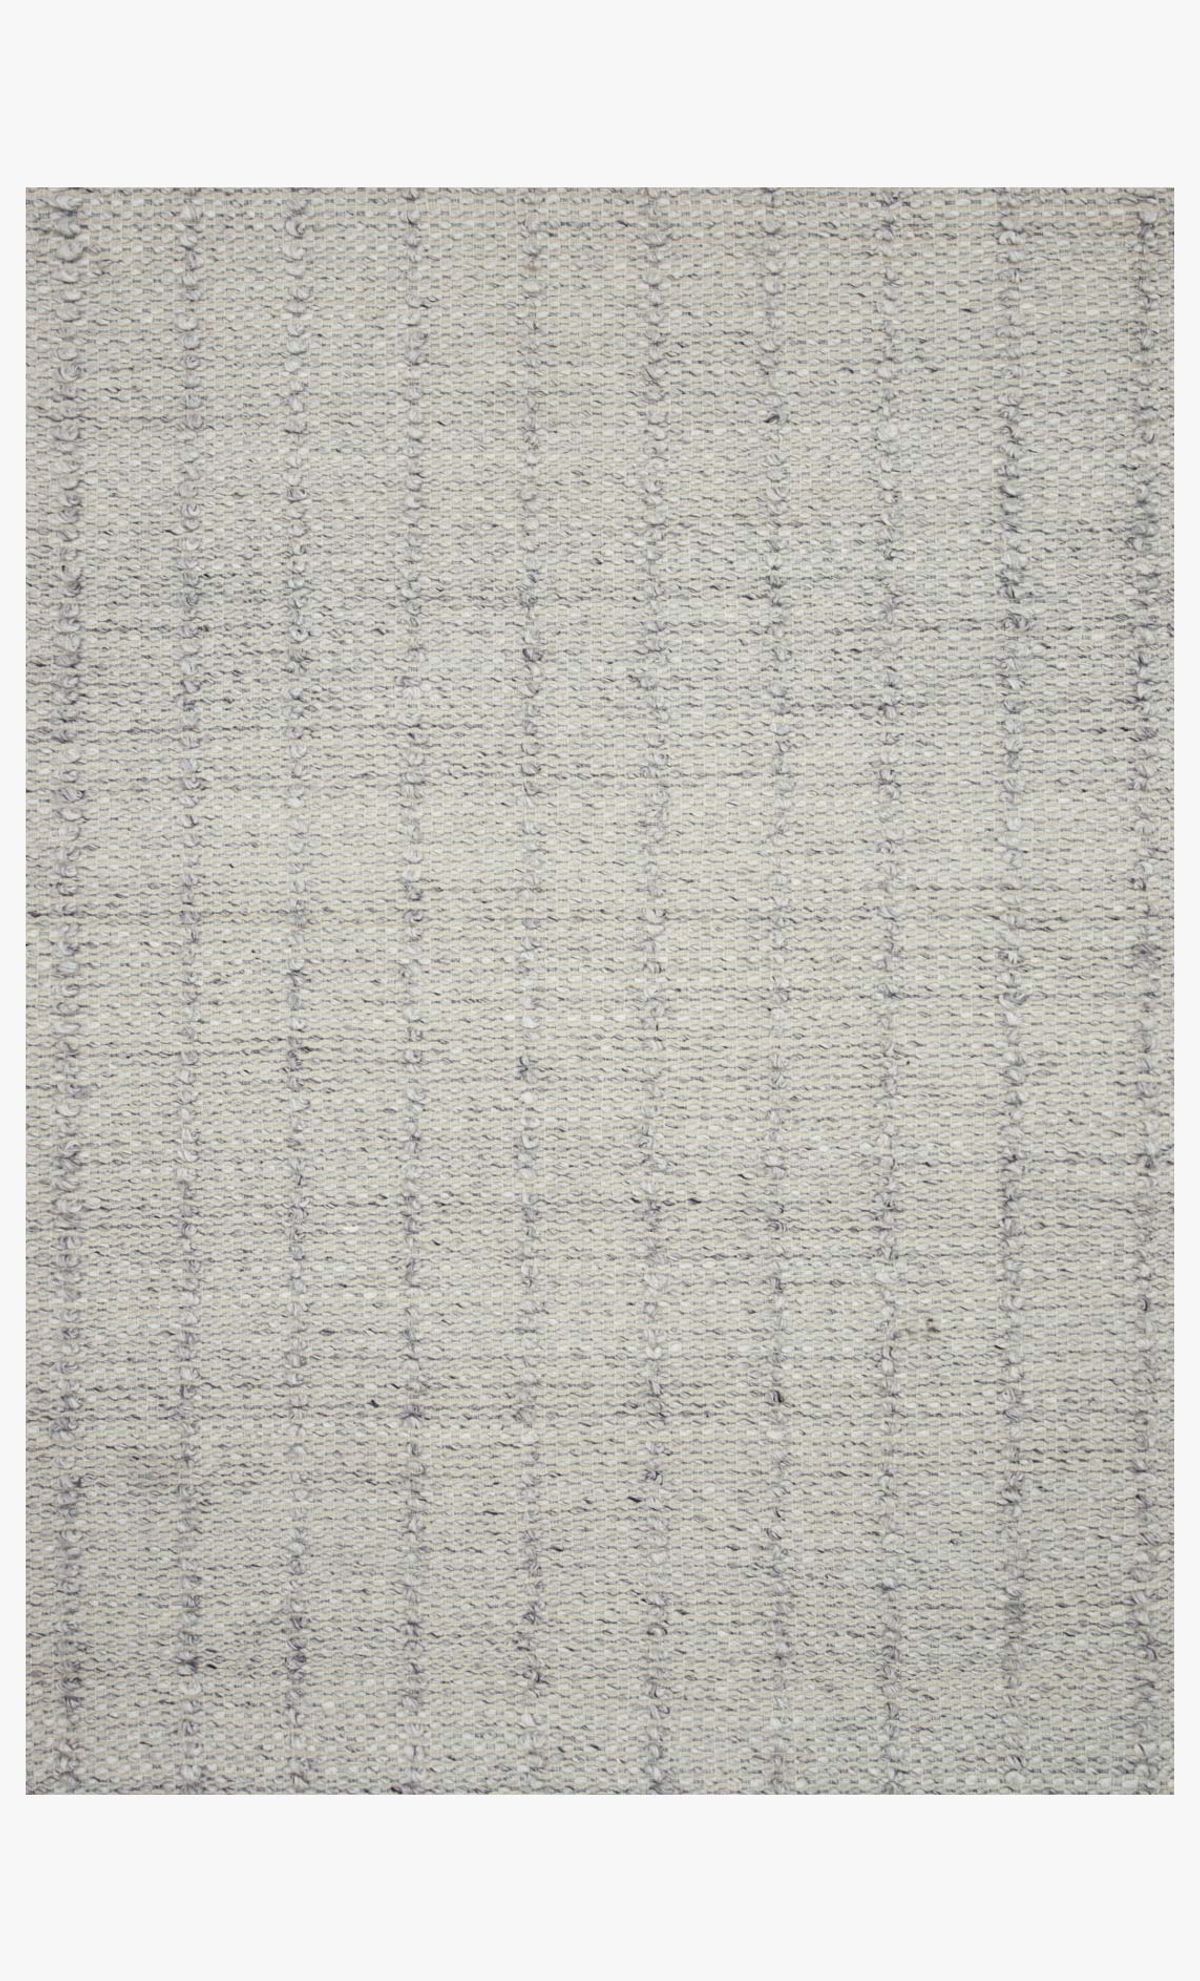 Shop Lt Grey 5' x 7'6" from Peggy Haddad Interiors Home on Openhaus